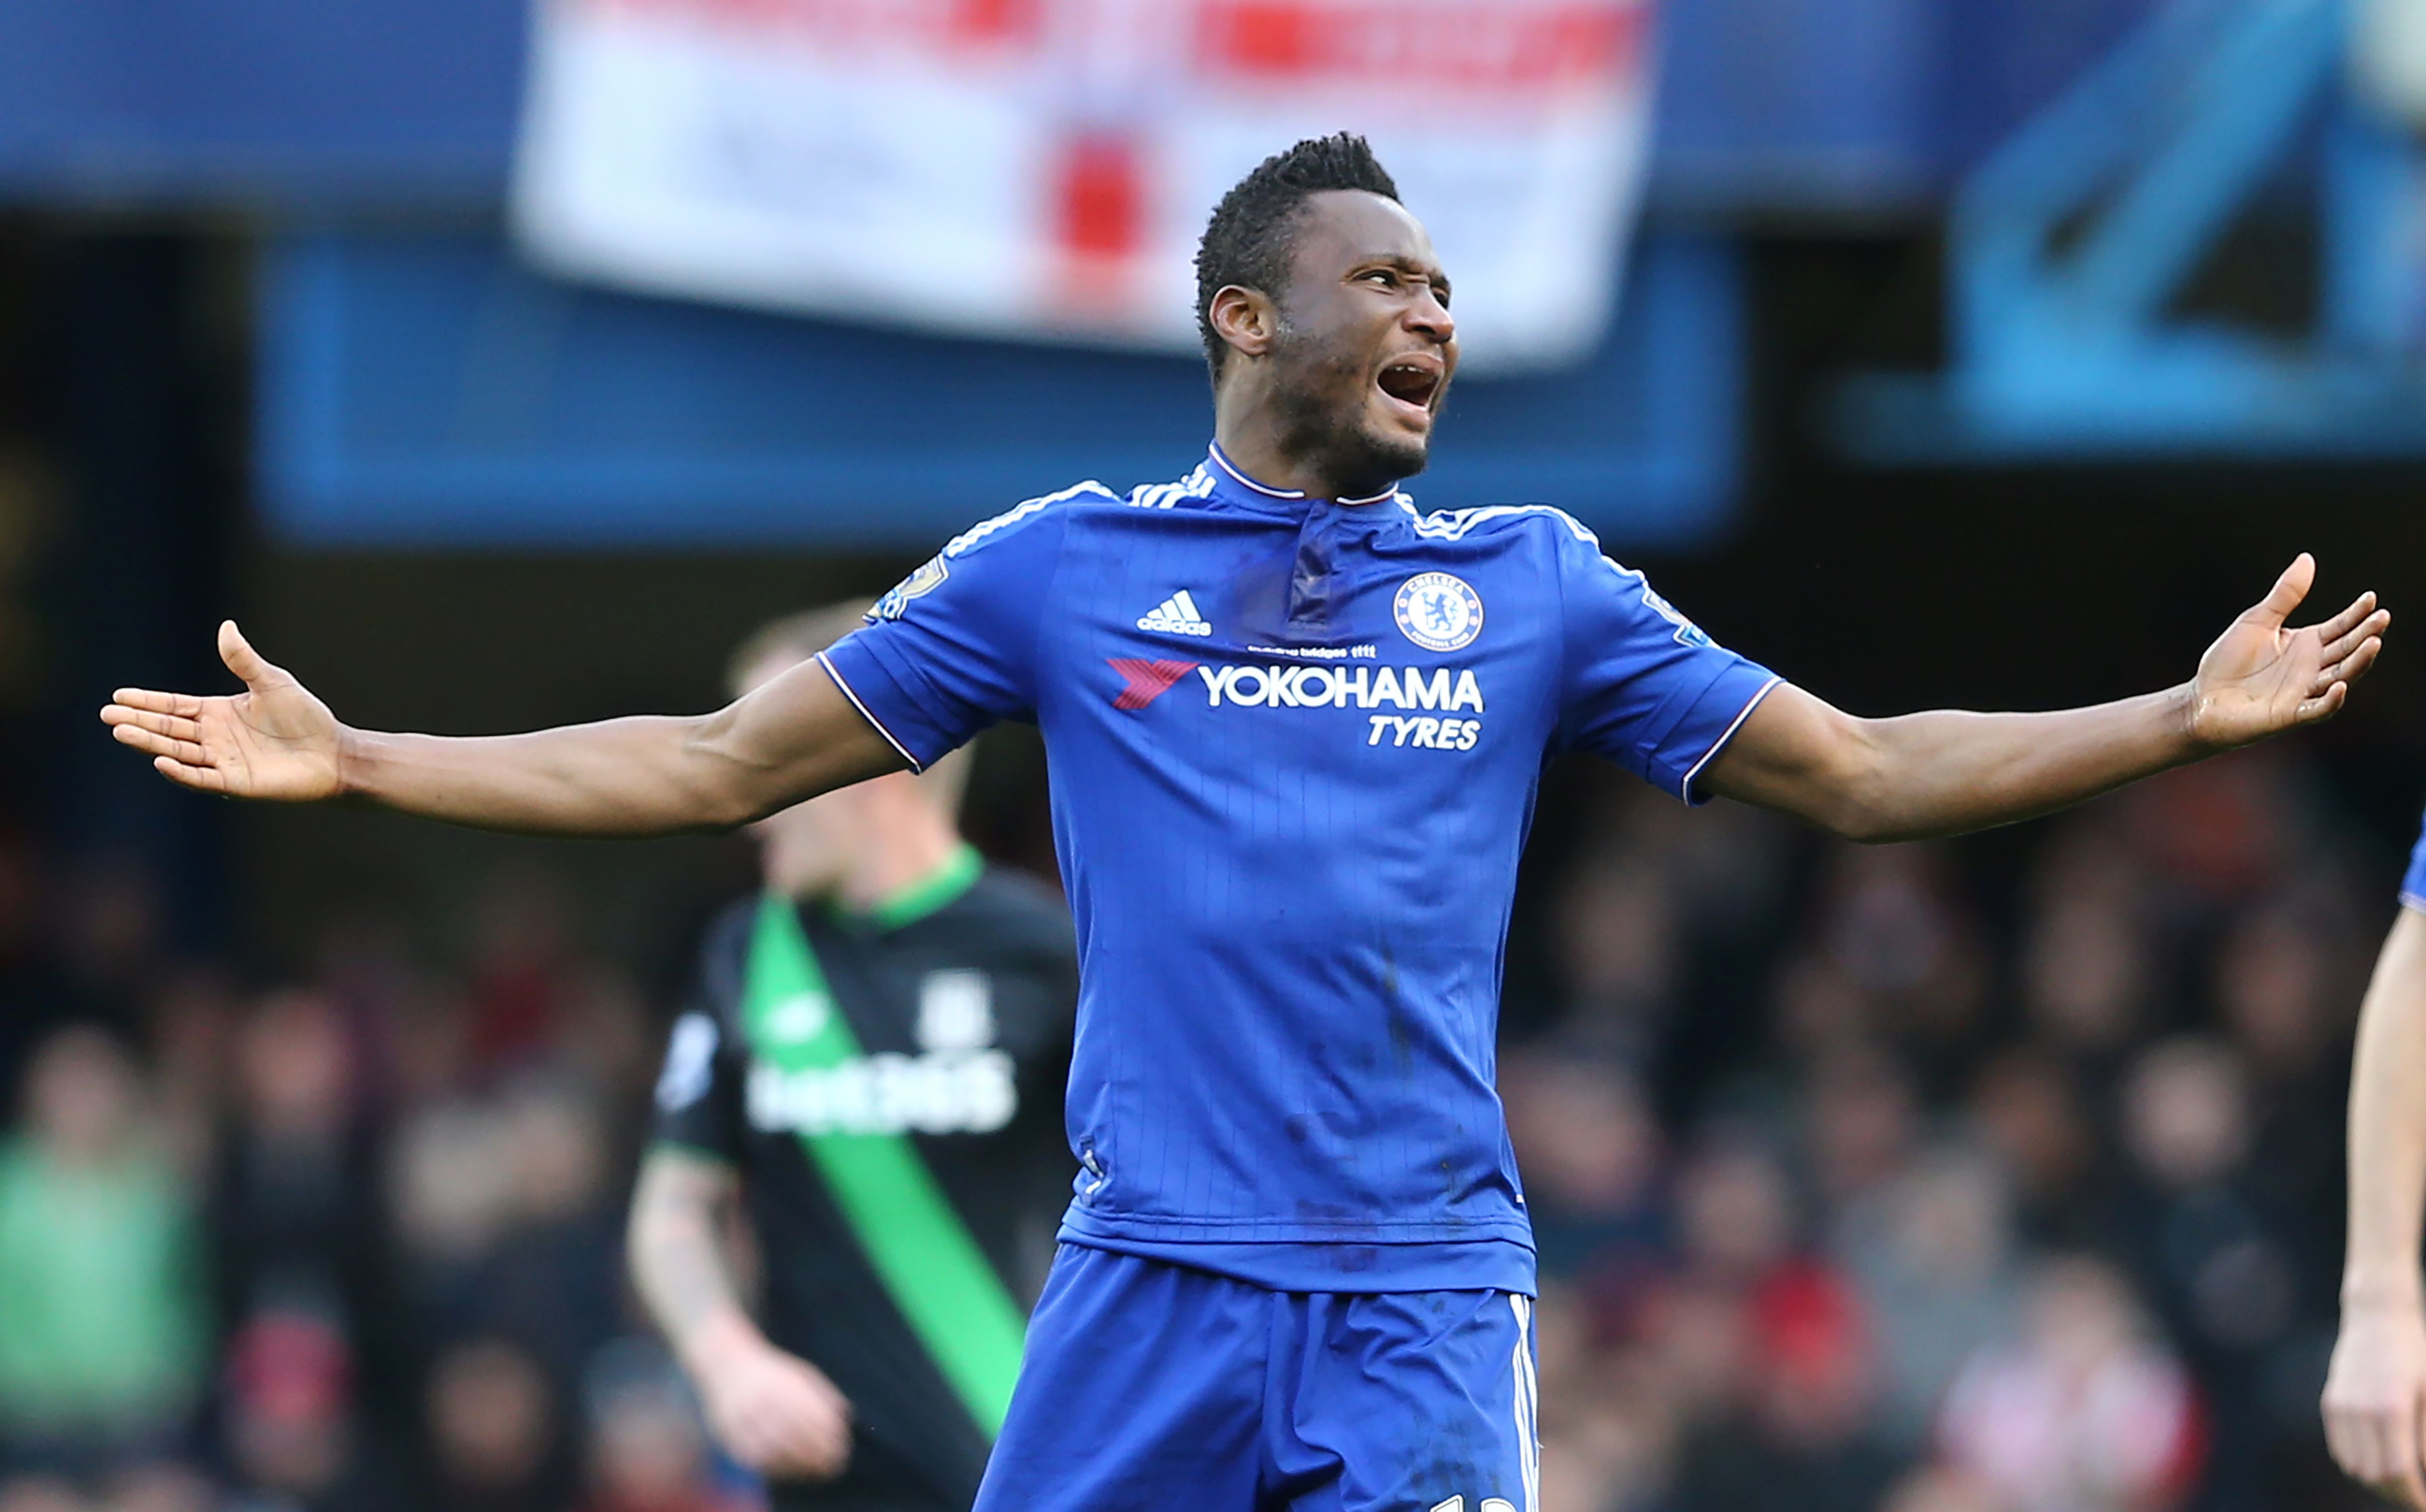 Chelsea's Nigerian midfielder John Obi Mikel reacts as the referee awards a freekick during the English Premier League football match between Chelsea and Stoke City at Stamford Bridge in London on March 5, 2016. / AFP / JUSTIN TALLIS / RESTRICTED TO EDITORIAL USE. No use with unauthorized audio, video, data, fixture lists, club/league logos or 'live' services. Online in-match use limited to 75 images, no video emulation. No use in betting, games or single club/league/player publications.  /         (Photo credit should read JUSTIN TALLIS/AFP/Getty Images)